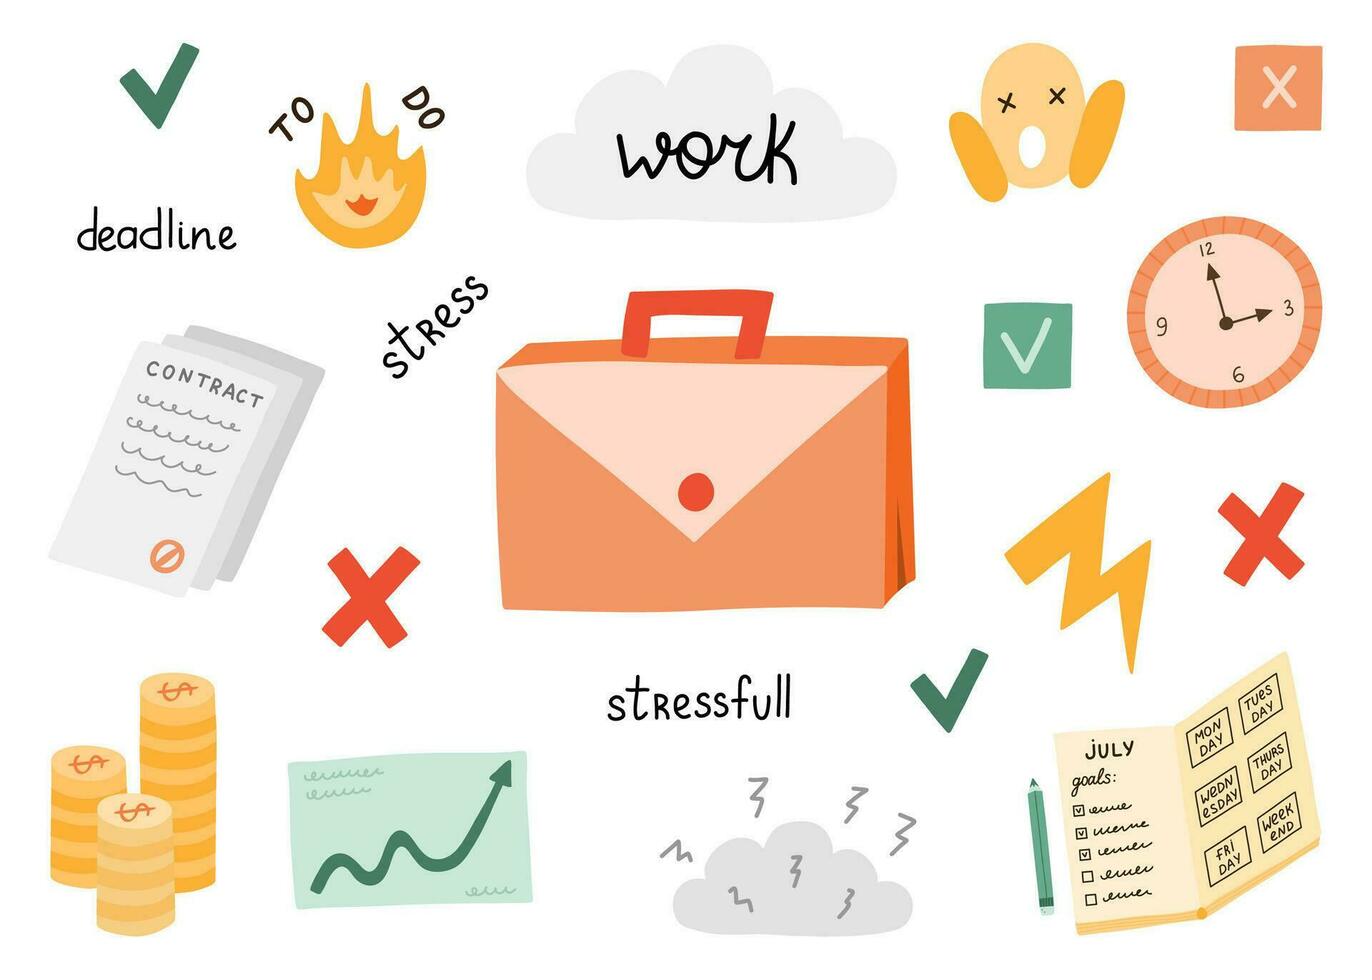 Work set with vector clipart and lettering. Concept about deadlines, stressful job, time management, planning tasks, finances, making contacts. Isolated hand drawn illustration about stress at work.